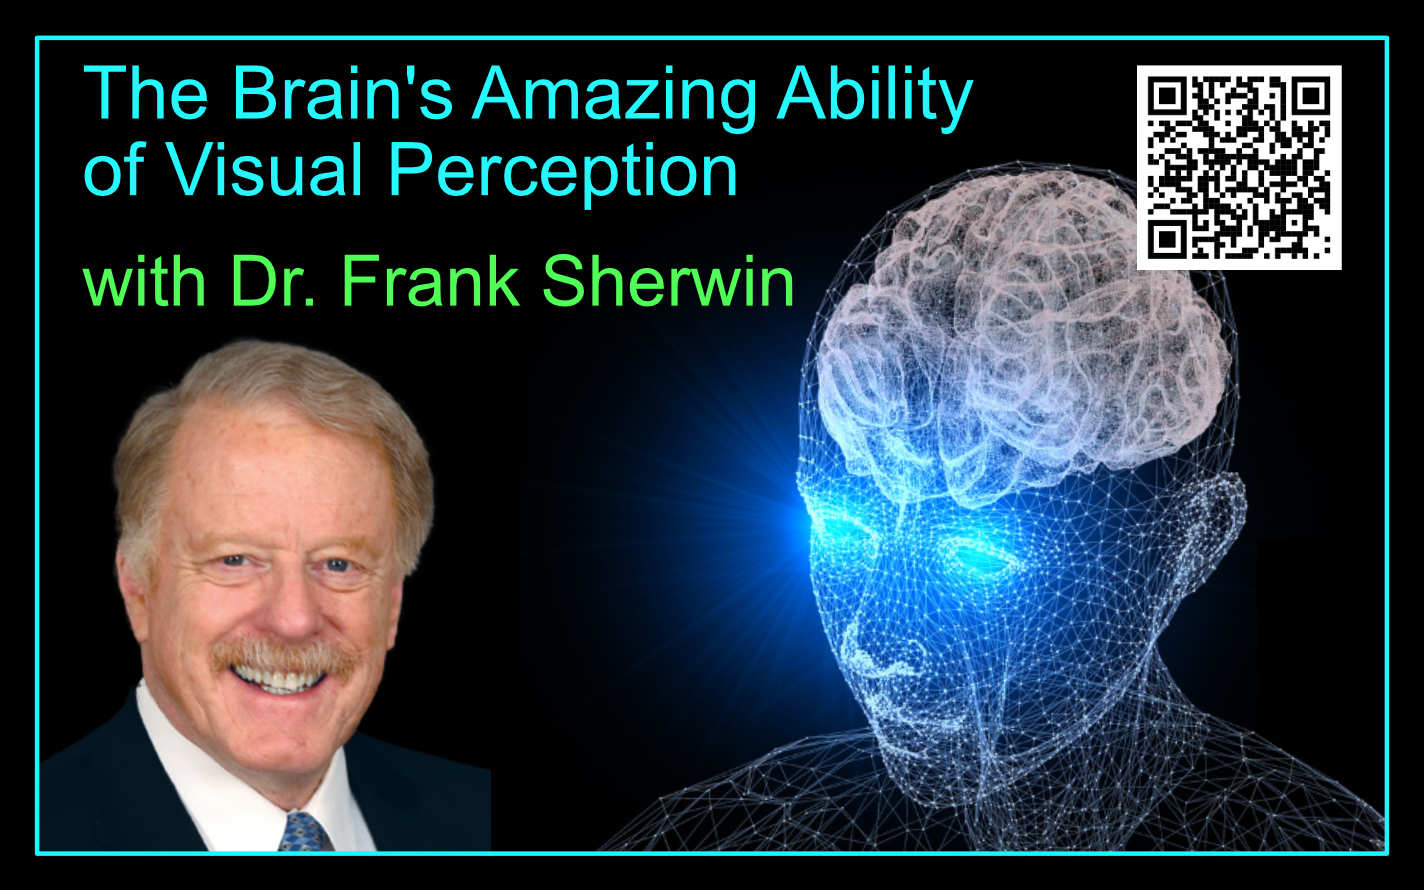 Title: The Brain's Amazing Ability of Visual Perception- Picture of Frank Sherwin. Click for his bio.